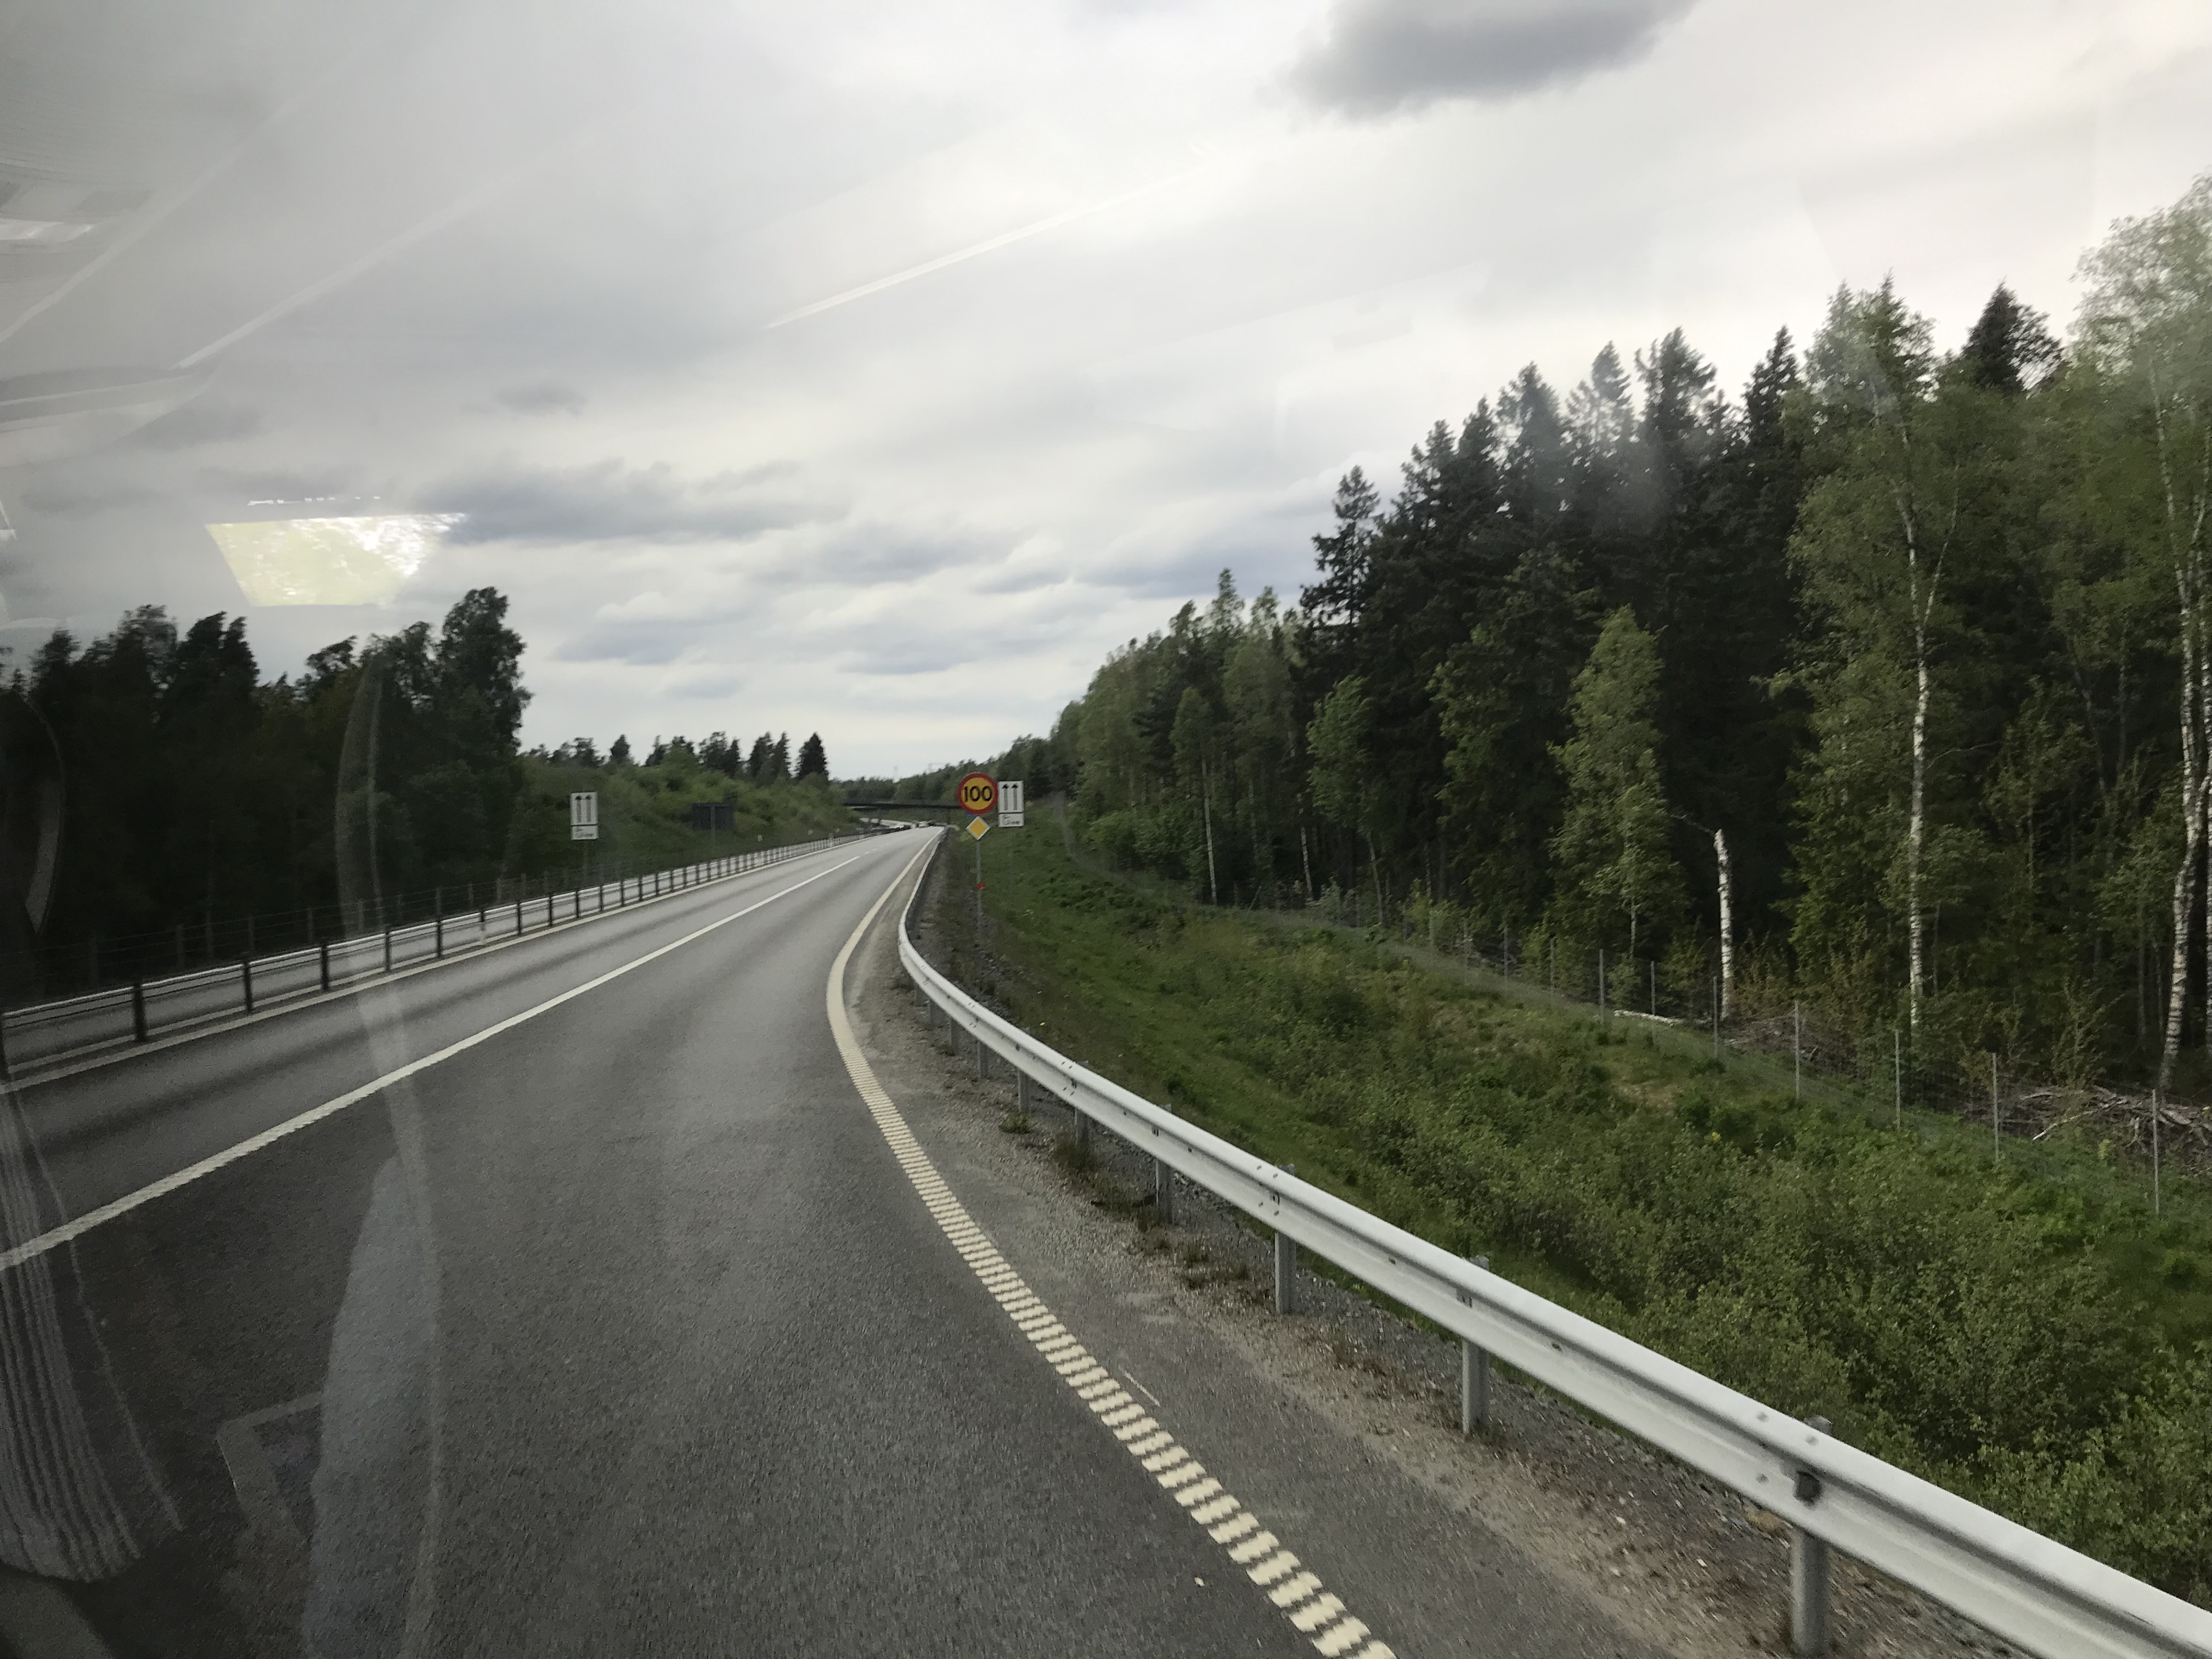 On a Swedish road (by bus) - from Stockholm to Gothenburg